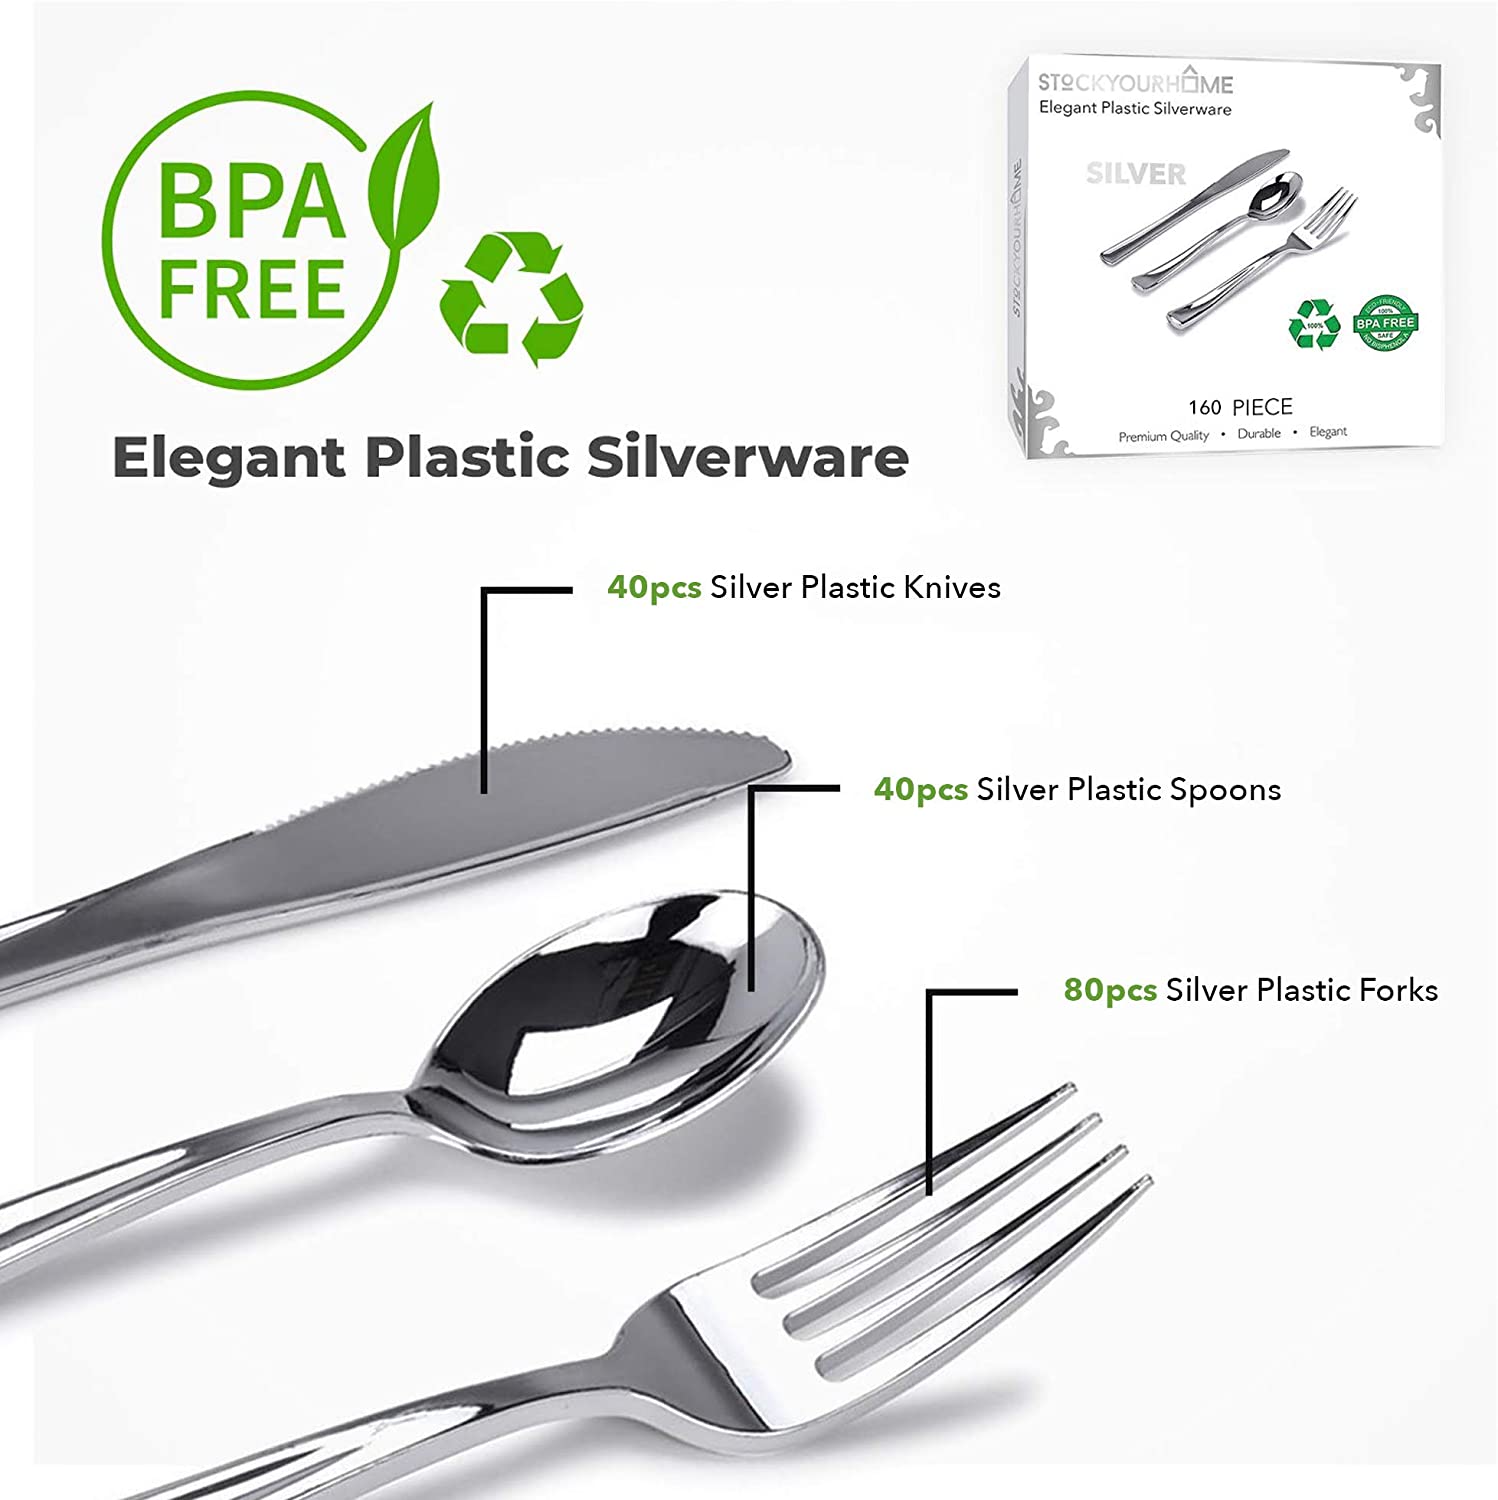 Clear Plastic Forks (300 Pack) - Party Disposable Forks - Heavyweight Utensils - Plastic Cutlery Bulk for Events, Everyday Meals, Take-Out, Restaurant